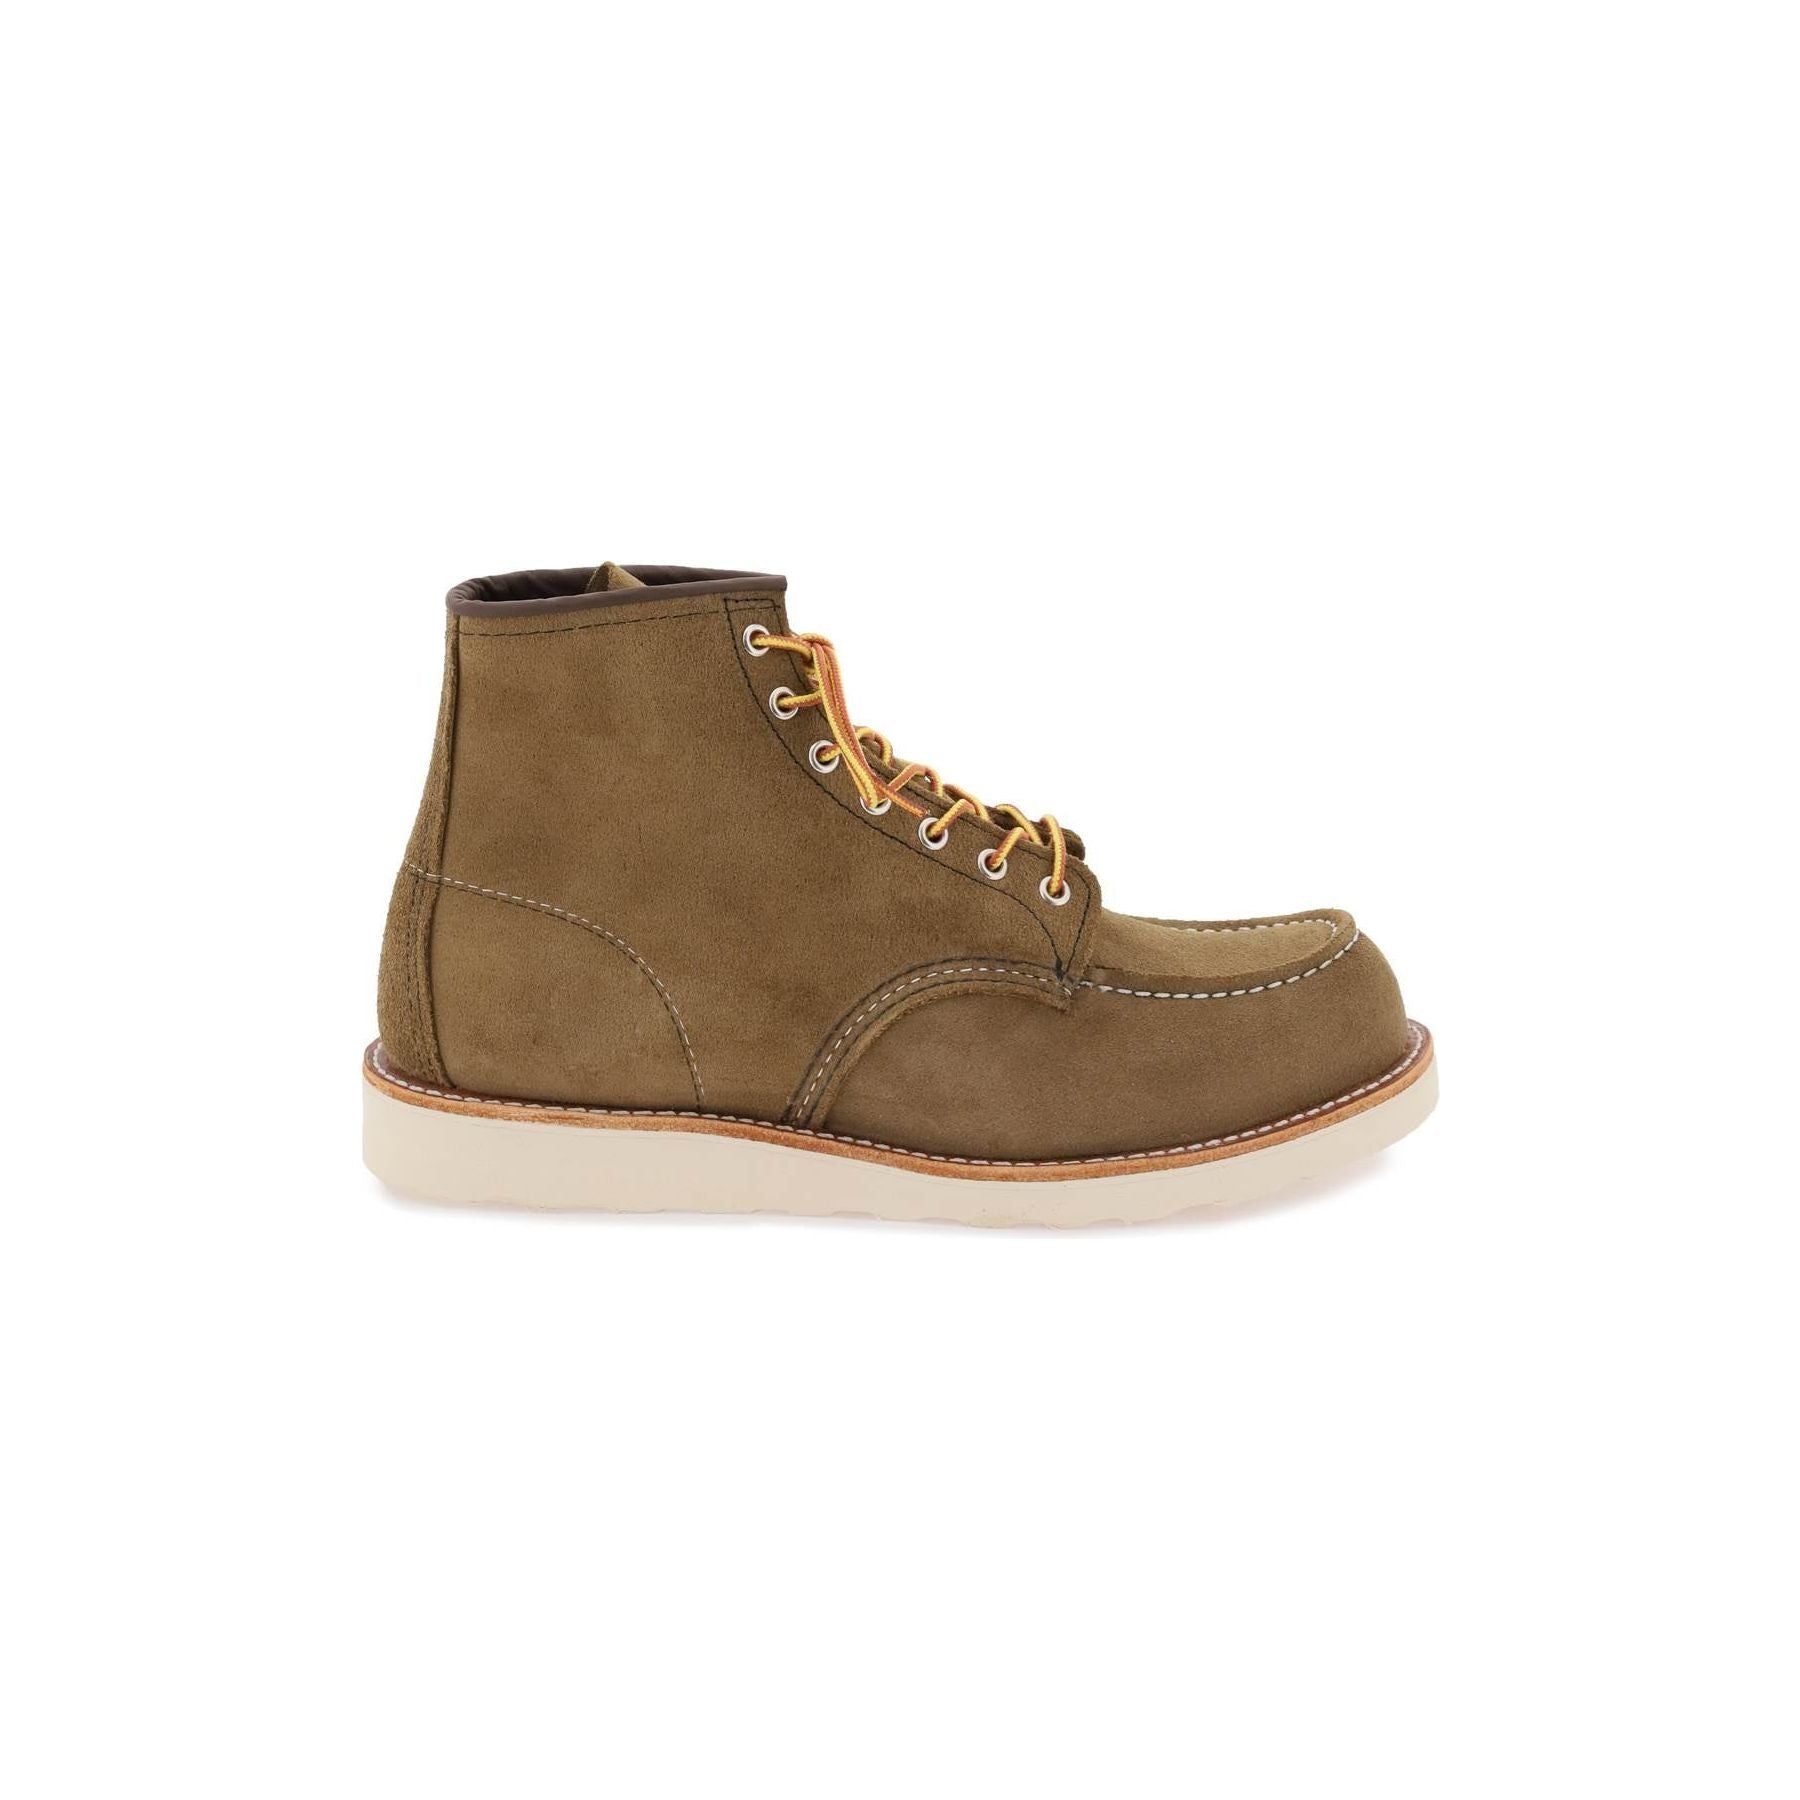 Olive Mohave 8881 6'' Classic Moc Toe Ankle Boots